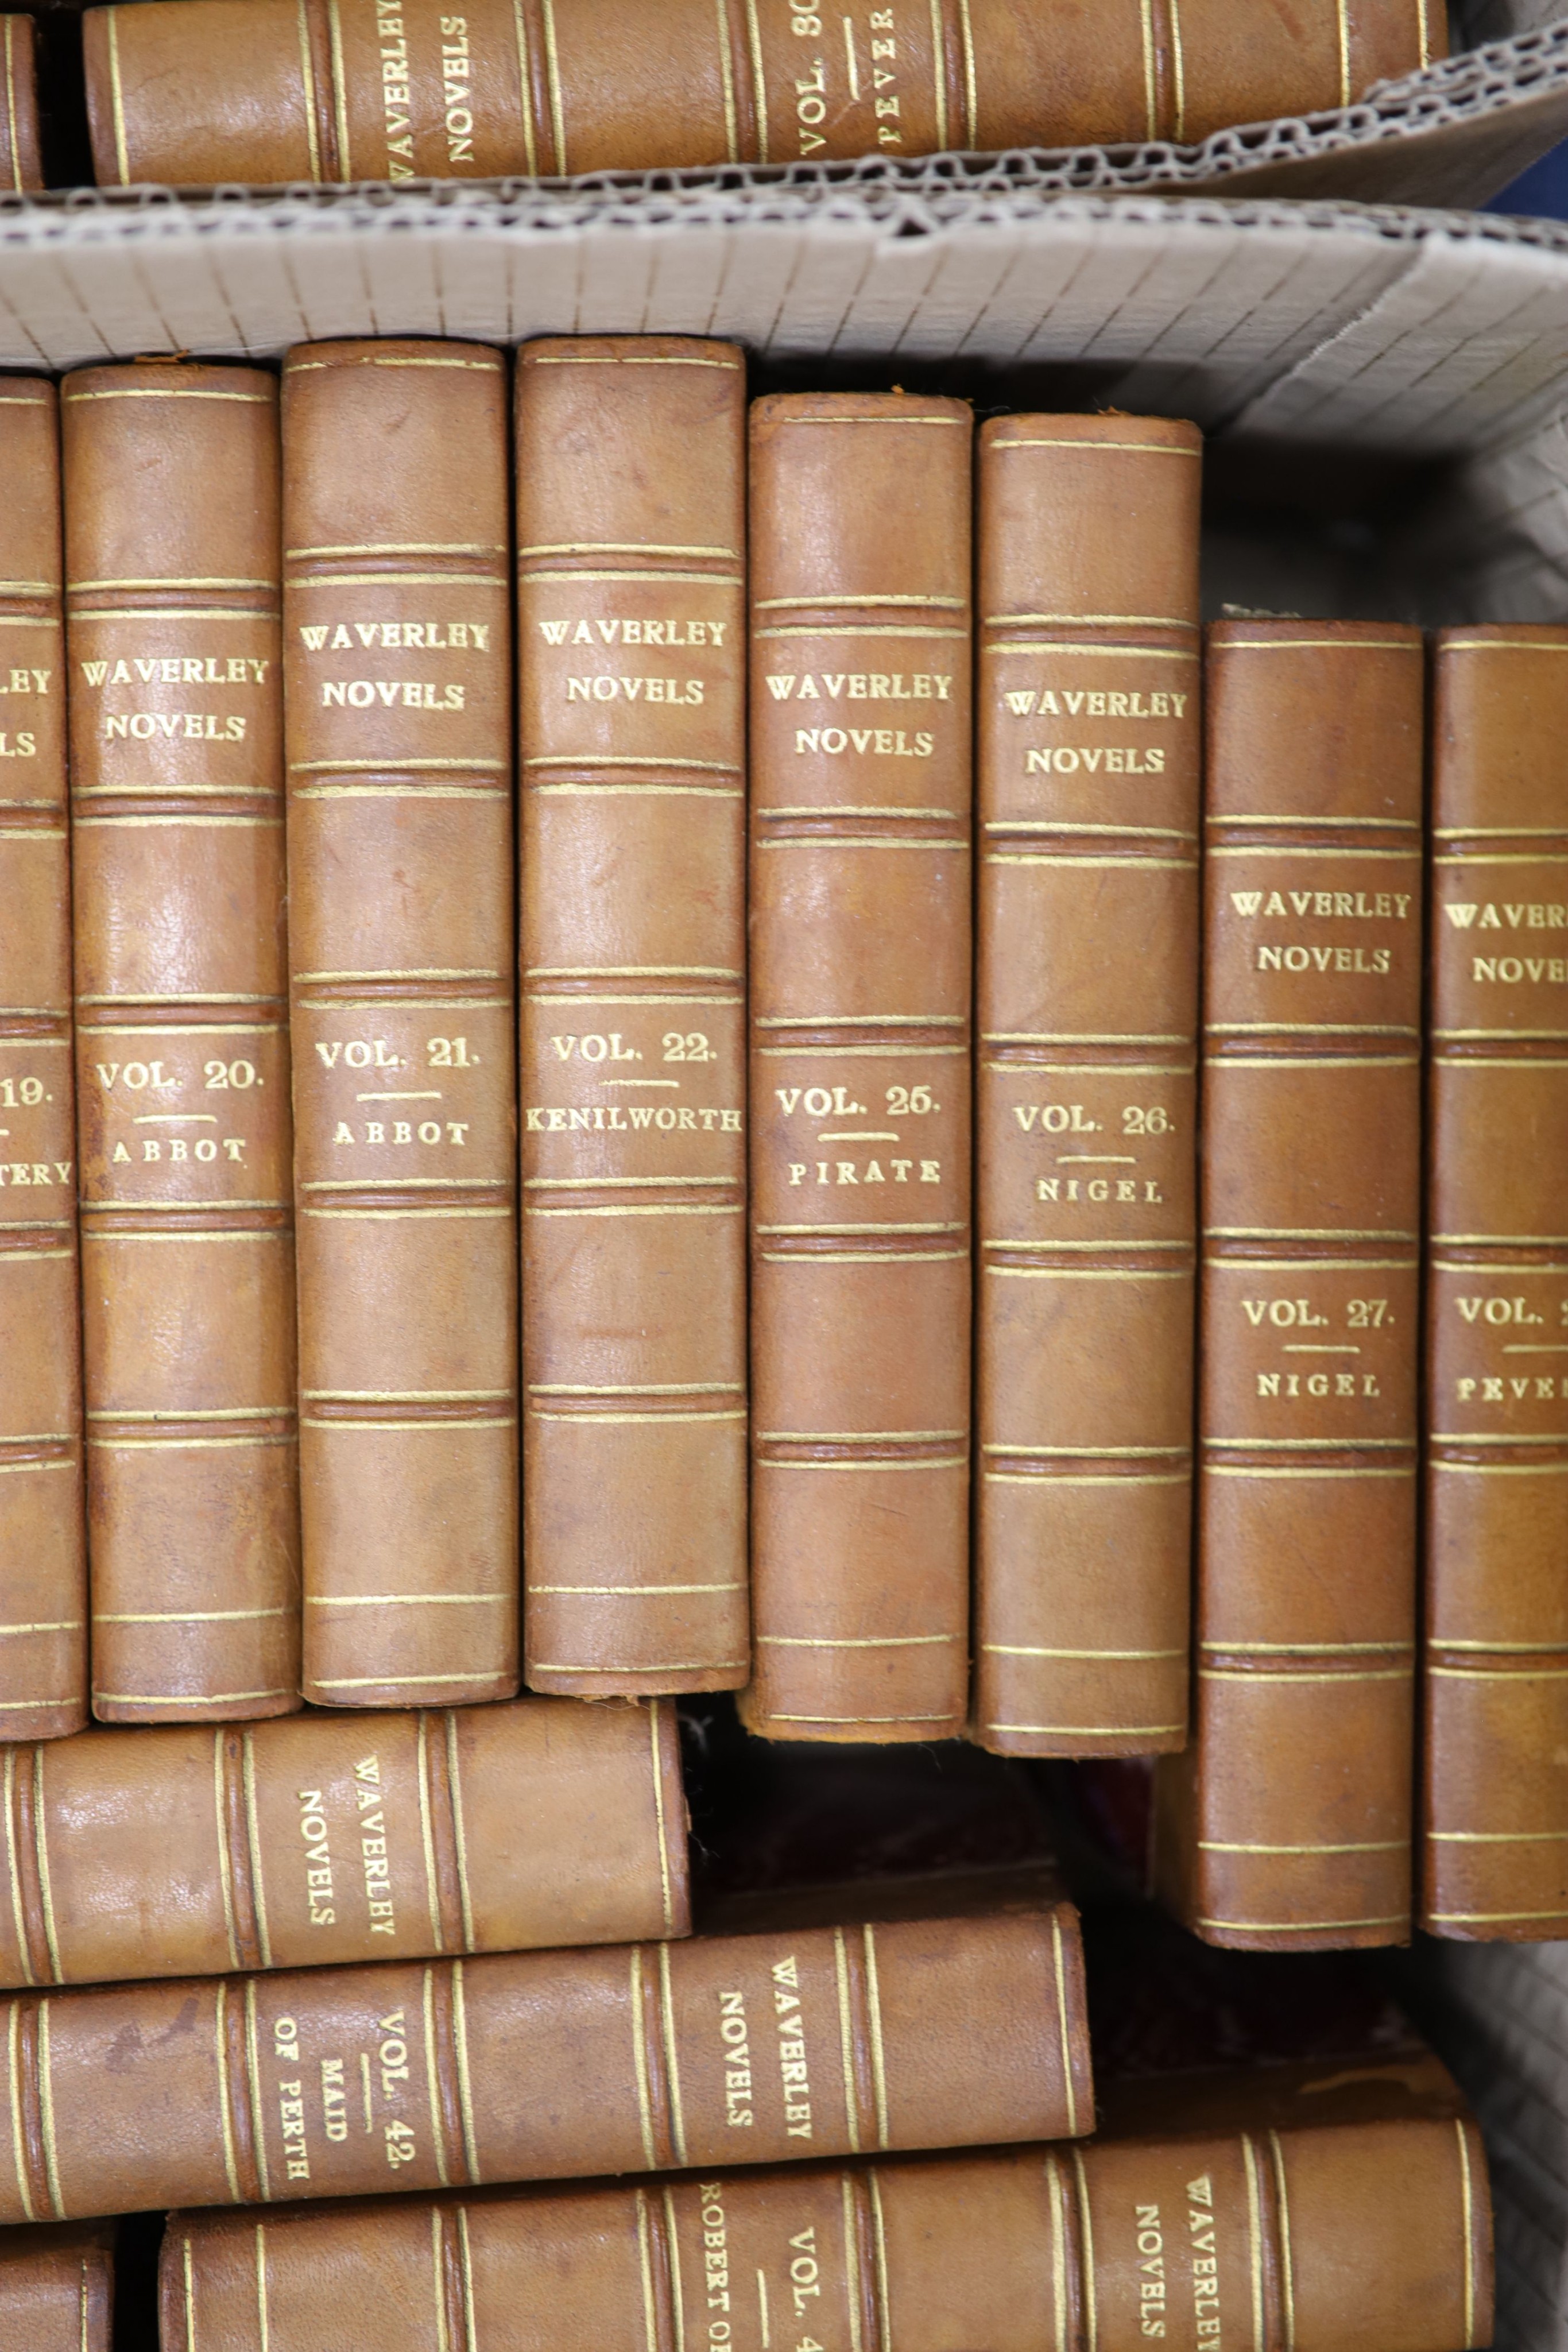 Anon. (Sir Walter Scott) - Waverly Novels. 48 vols. Each complete with an engraved frontispiece and title page vignette, with guards. Half calf and marble boards, gilt ruled and panelled spines with letters direct. Marbl